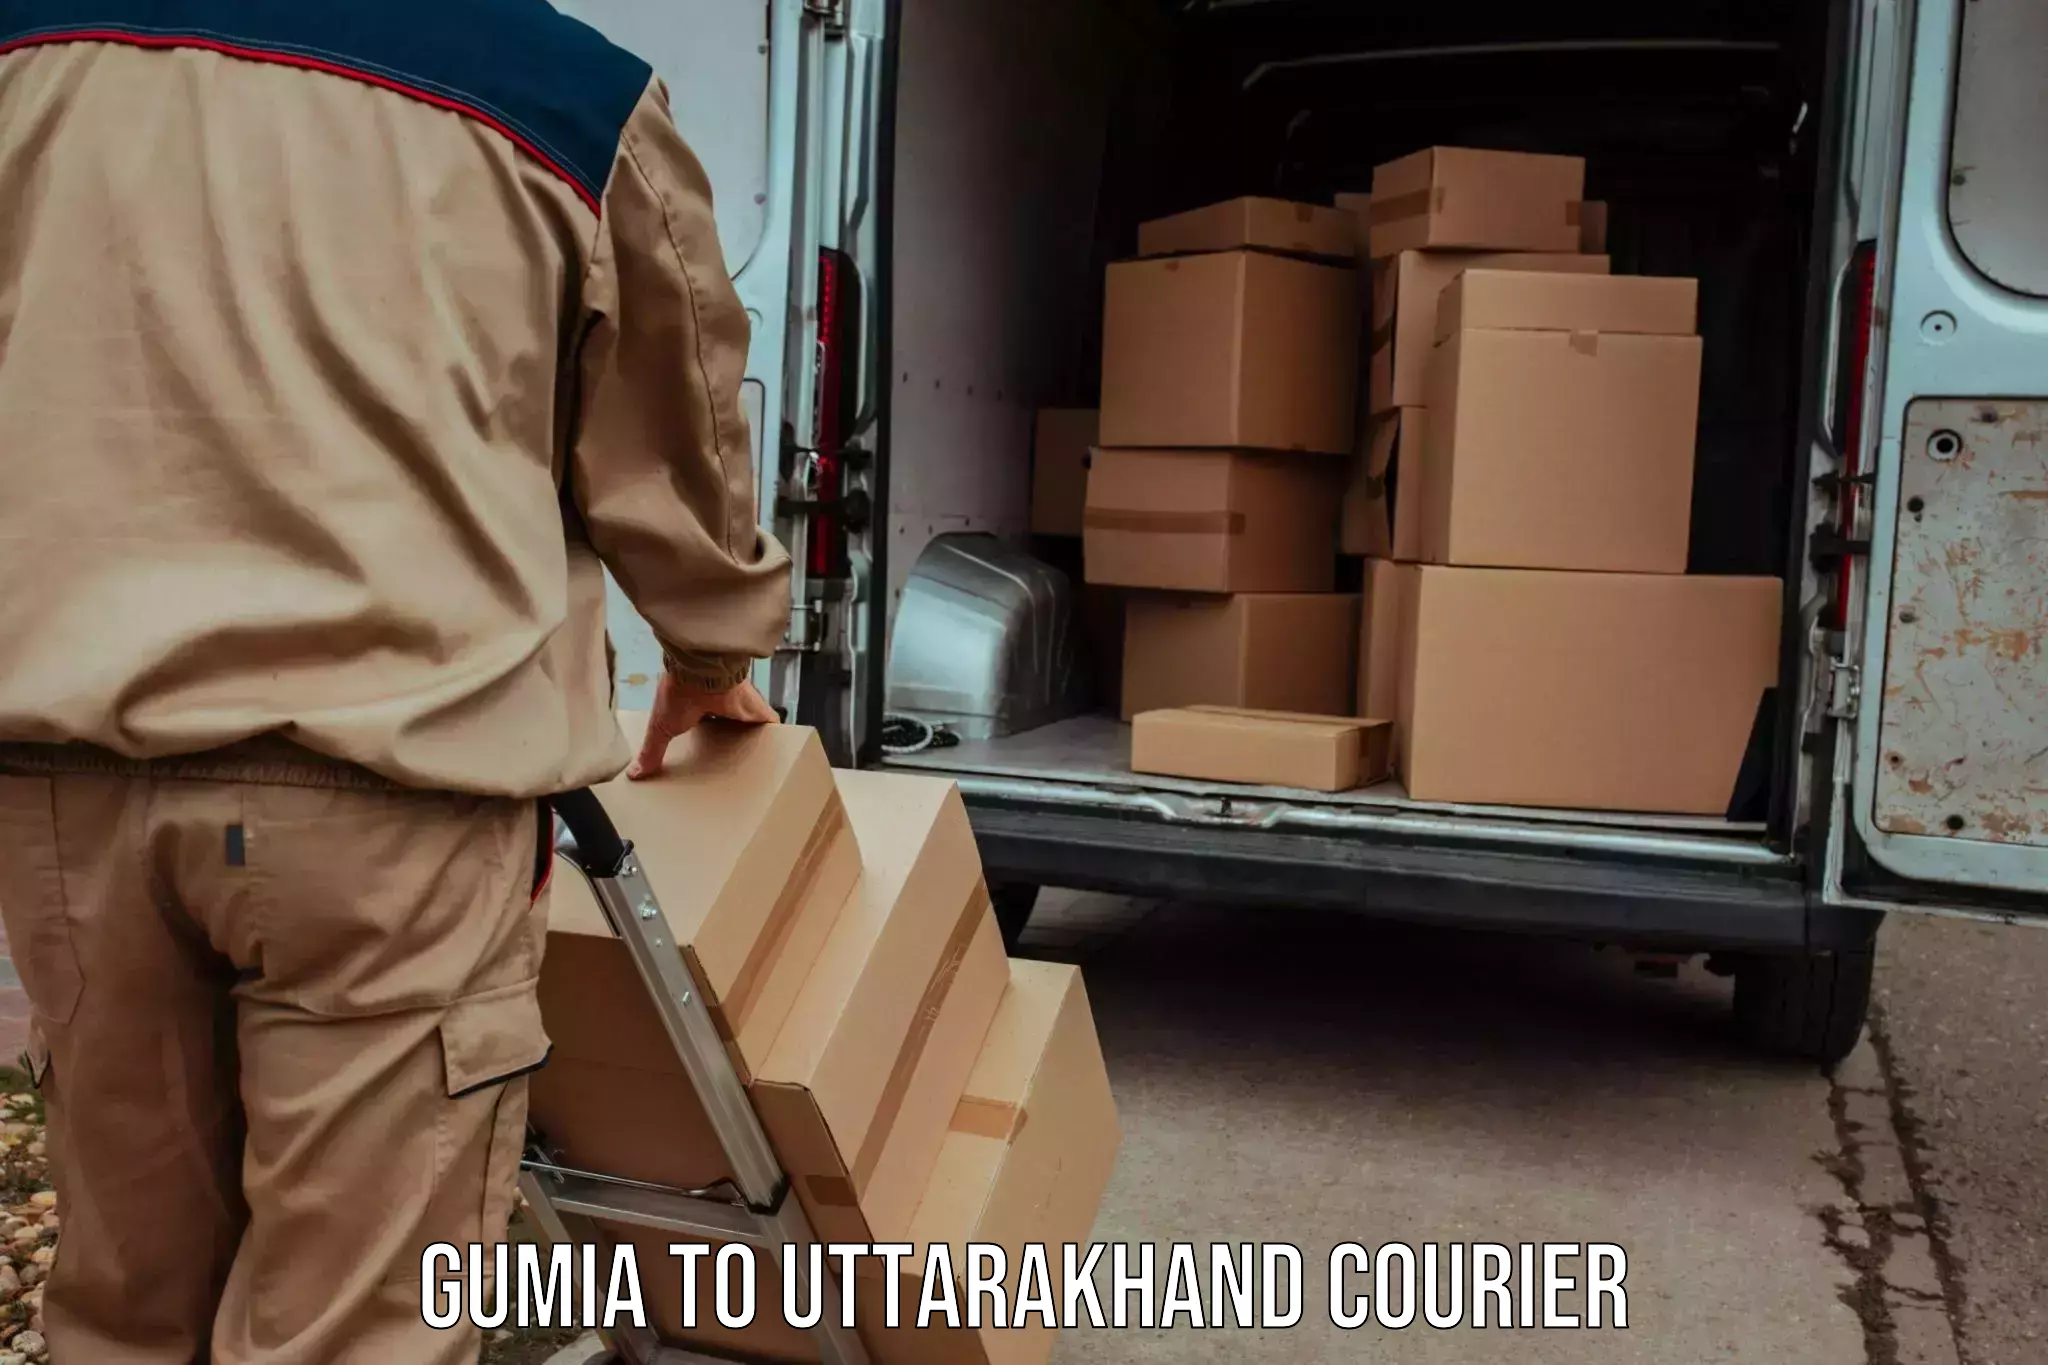 Cargo delivery service Gumia to Uttarakhand